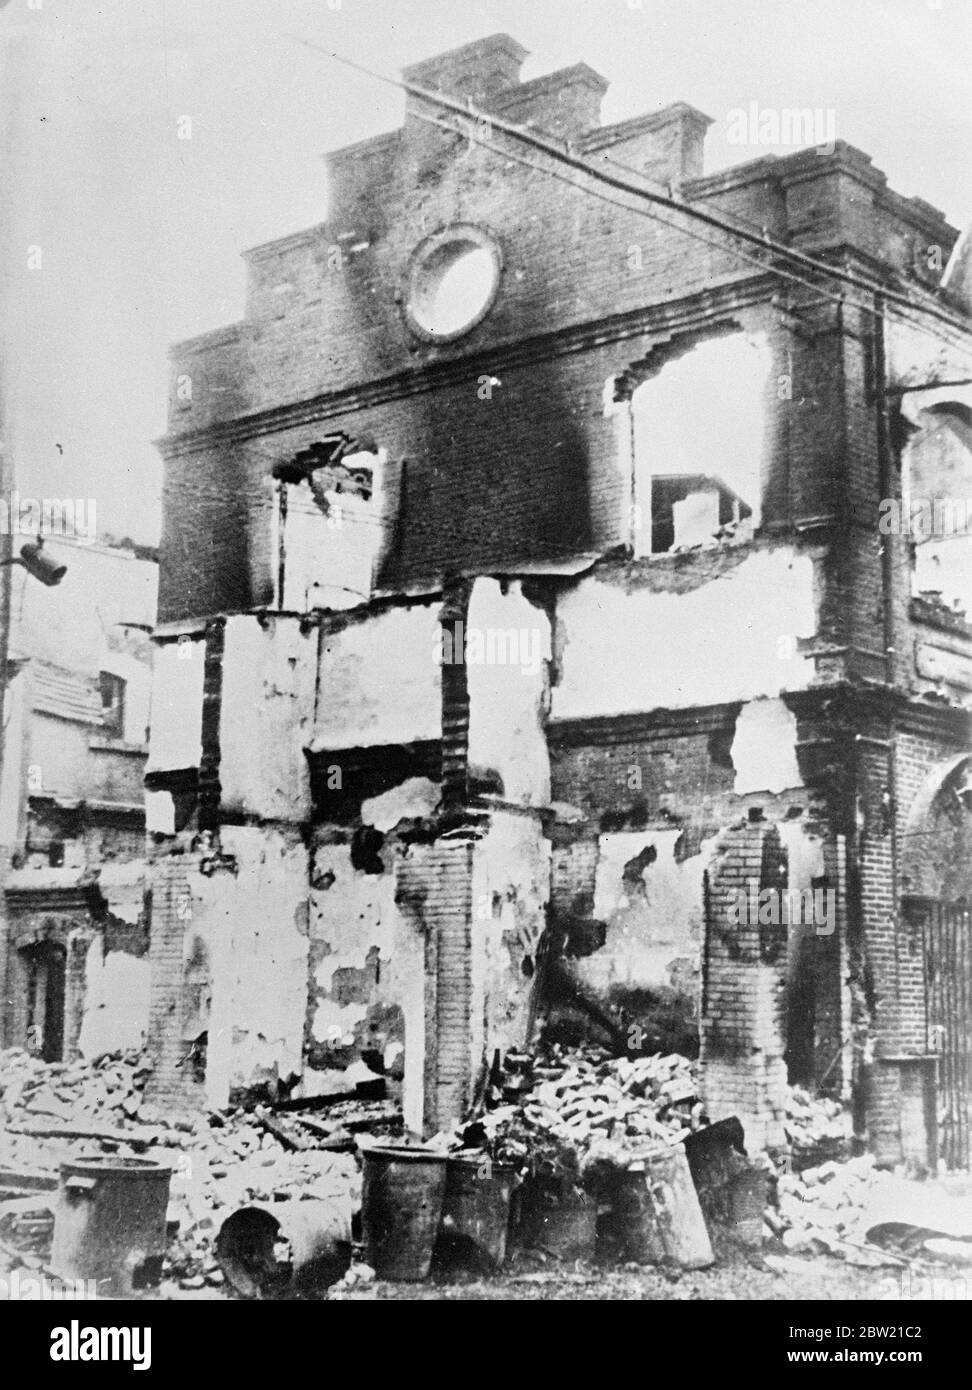 The ruined shell building Tientein which gave the testimony to the marksmanship of Japanese gunners. The fierce fighting which took place there between Chinese and Japanese troops. After Southern resistance by the Chinese took possession of the city when they carried out mopping up operations in the streets. Fighting is still going on in the south of the country. 23 August 1937 Stock Photo